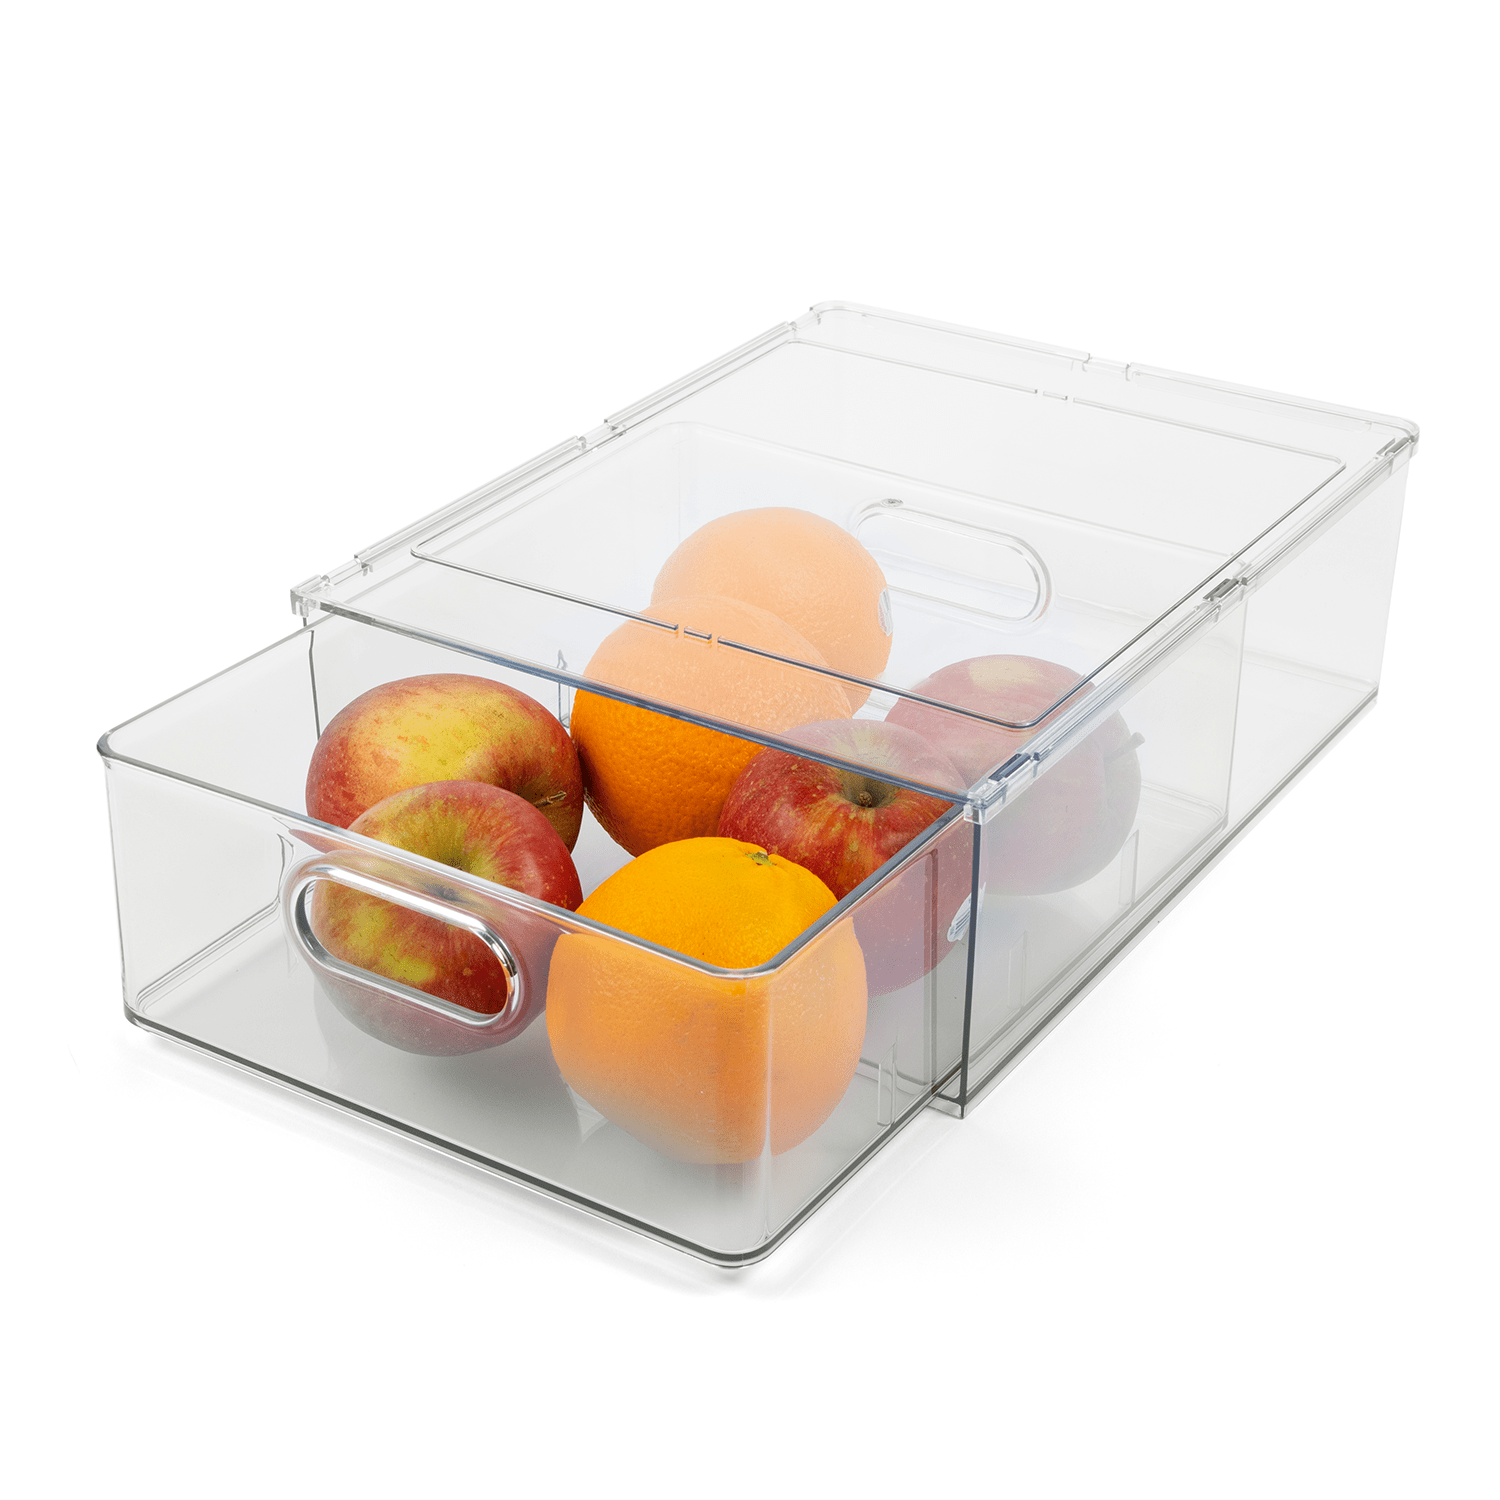 Tidy Tools Clear Organizer Bins with Pull-out Drawers, Stackable Organizer with Handles